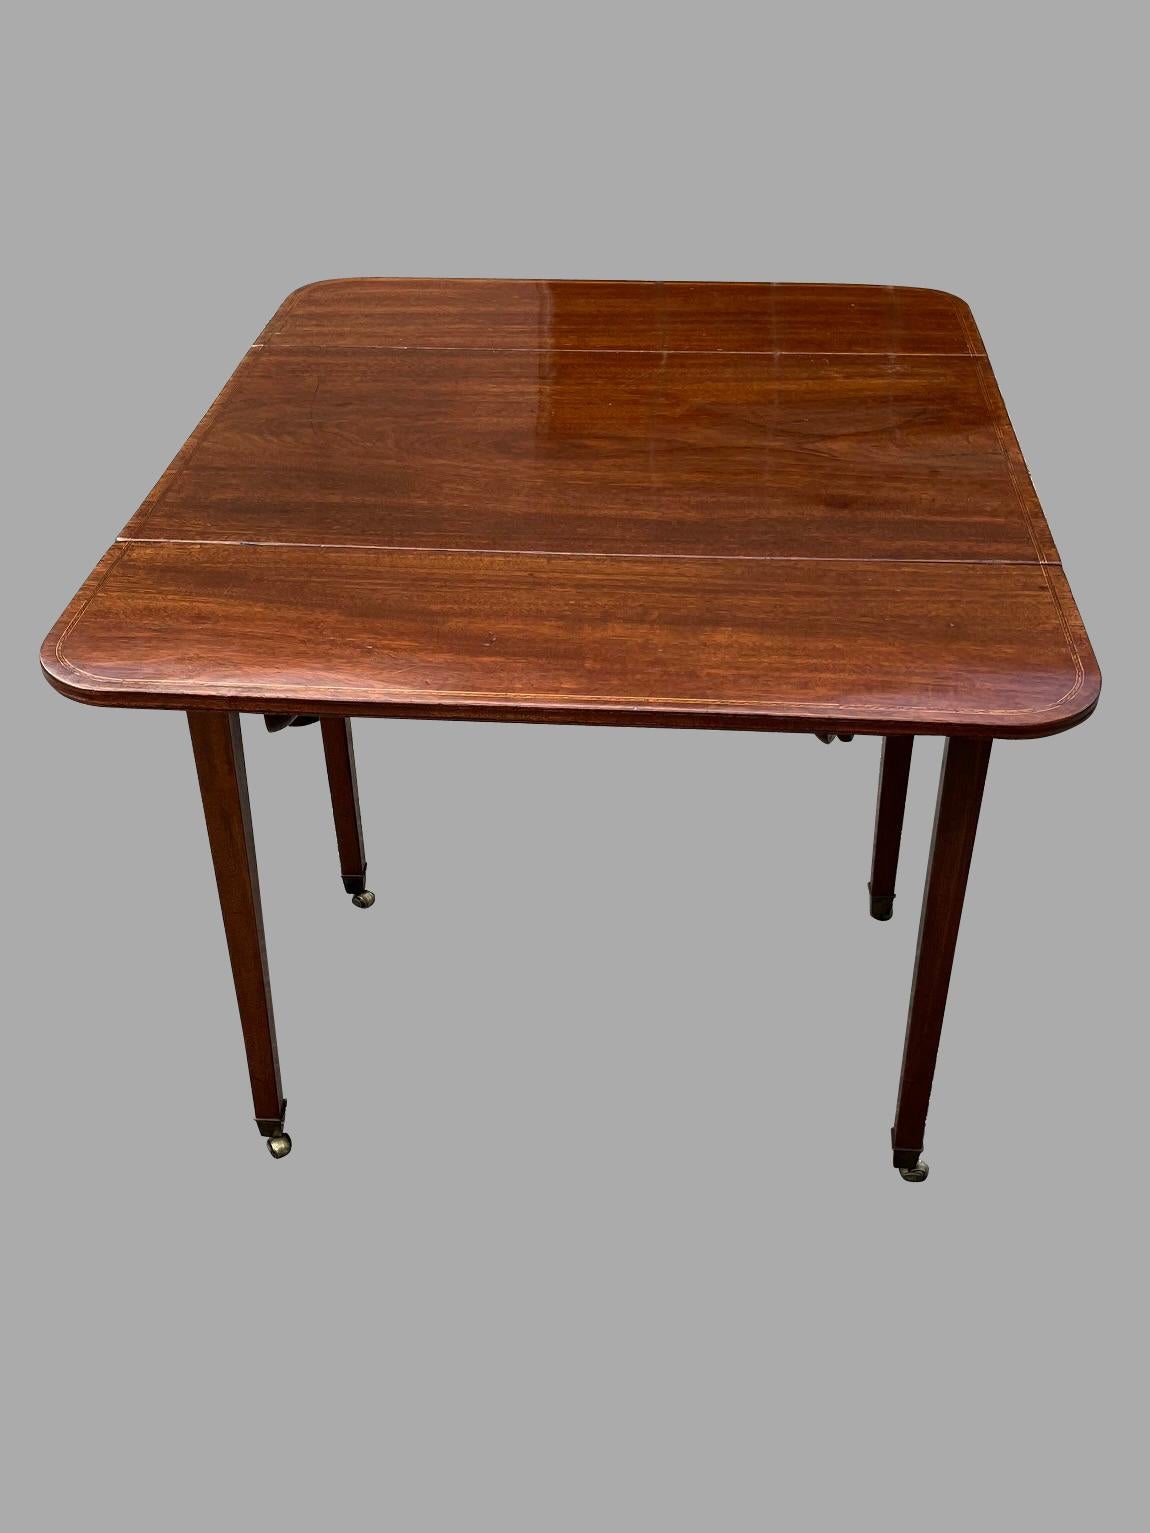 English Rectangular Georgian Period Mahogany Pembroke Table with Single Drawer In Good Condition For Sale In San Francisco, CA